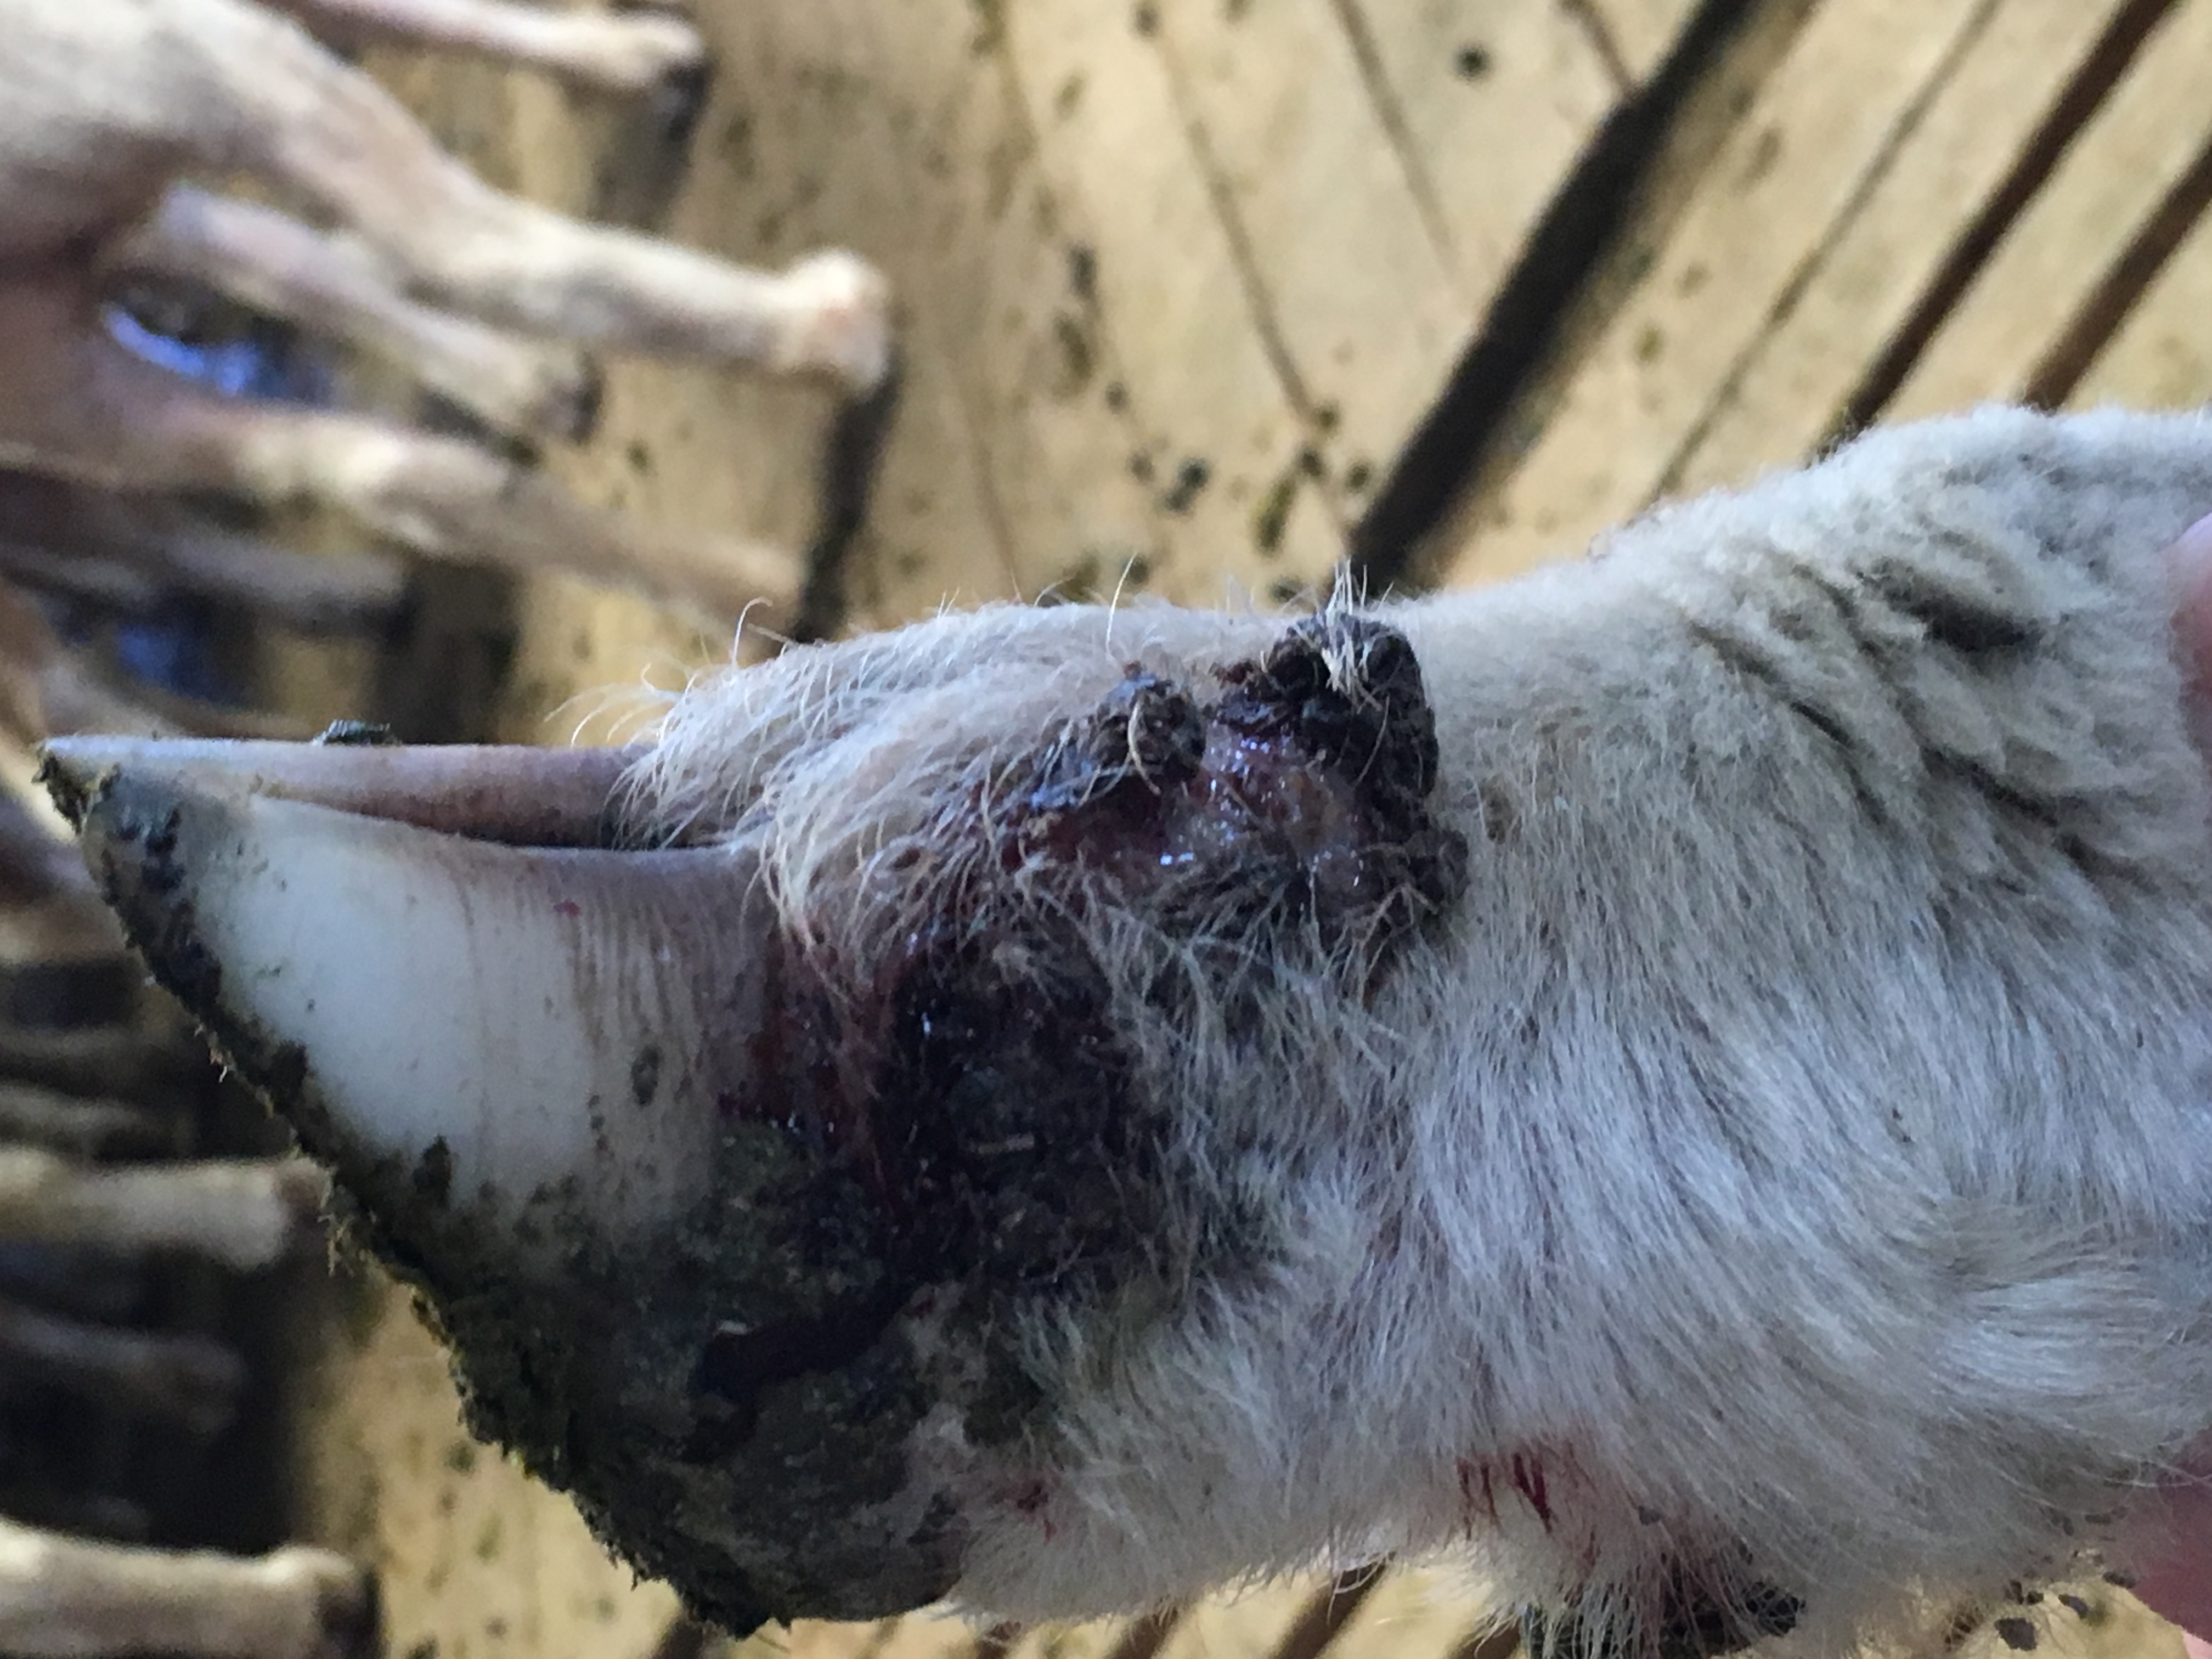 Close up image of a scab on a lambs lower leg. 